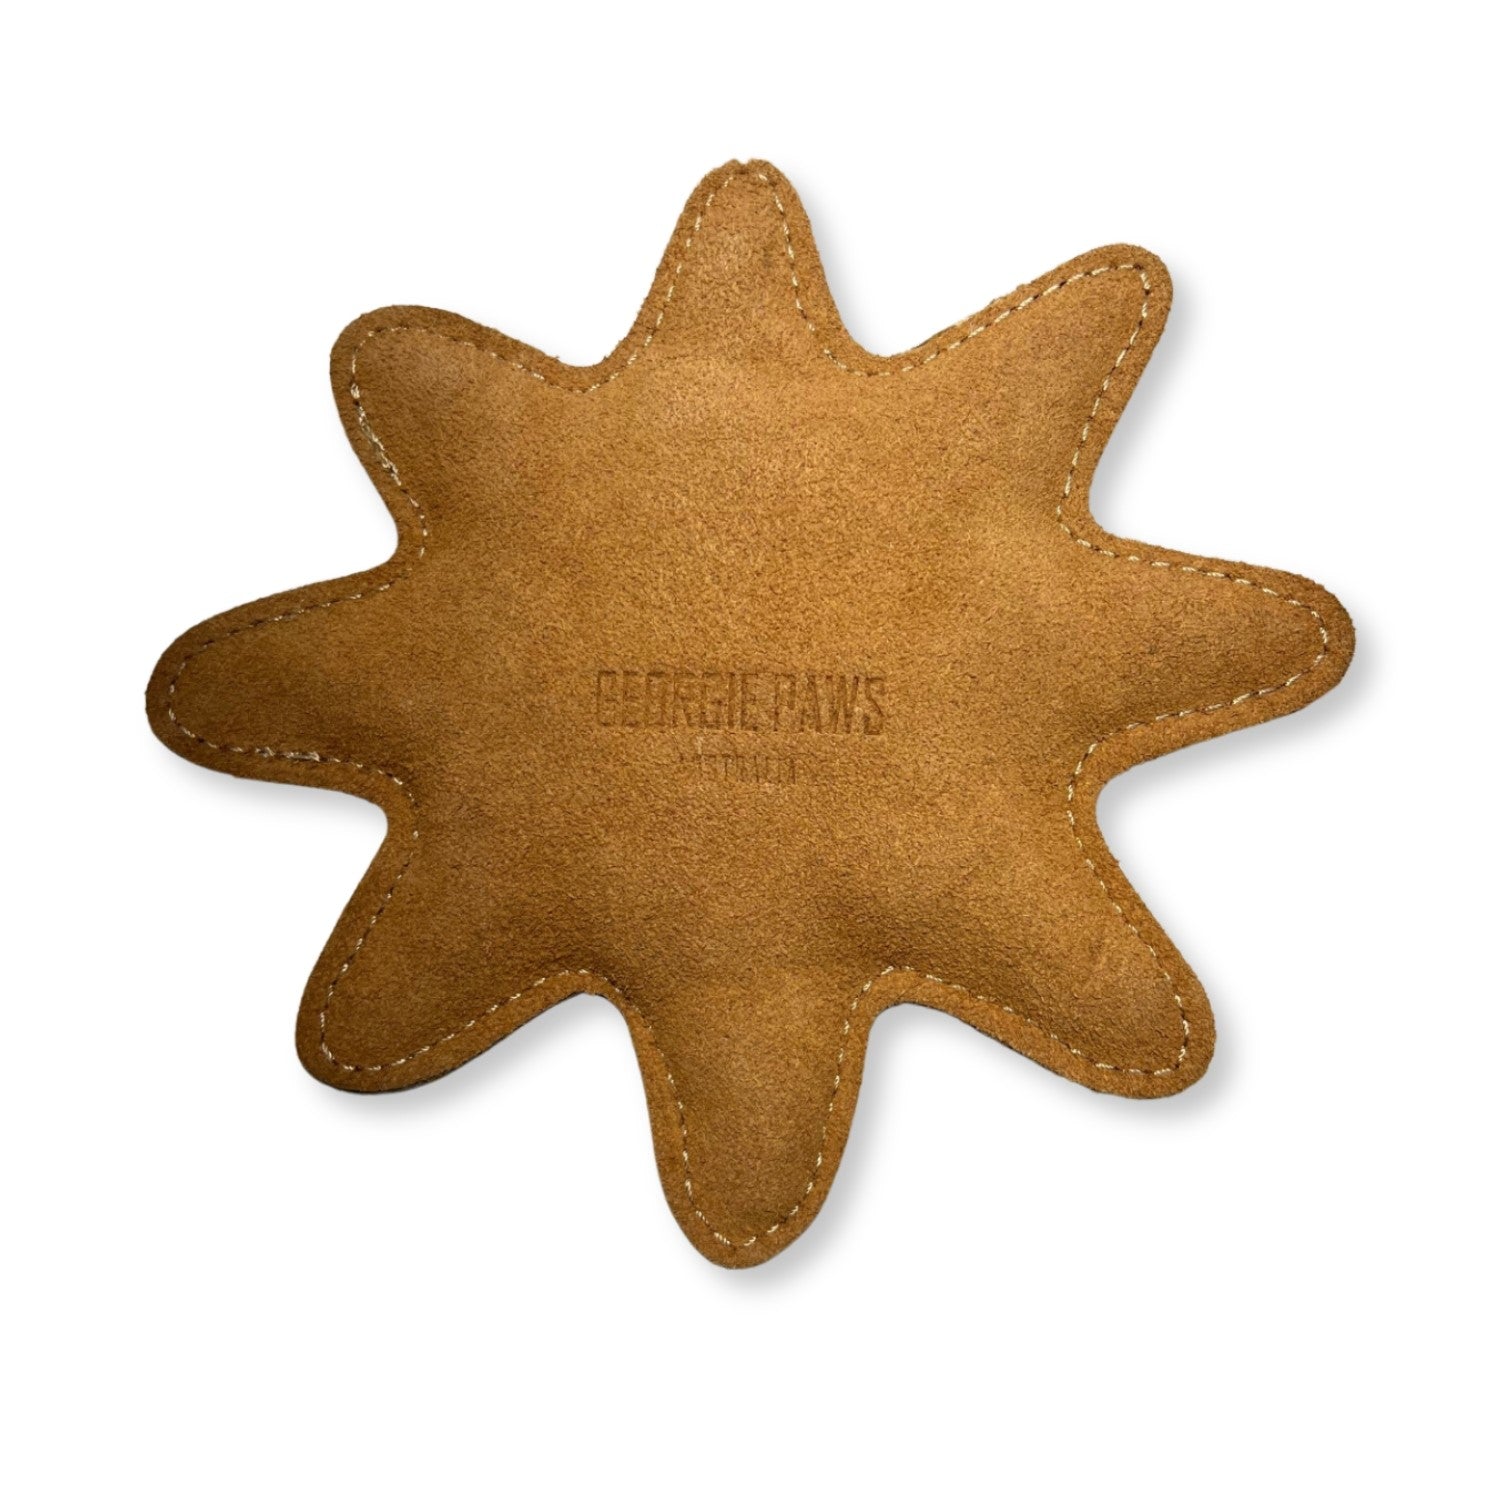 A tan-colored eco-friendly leather coaster in the shape of a star, with stitched edges, features an embossed logo "Georgie Paws" near the center.